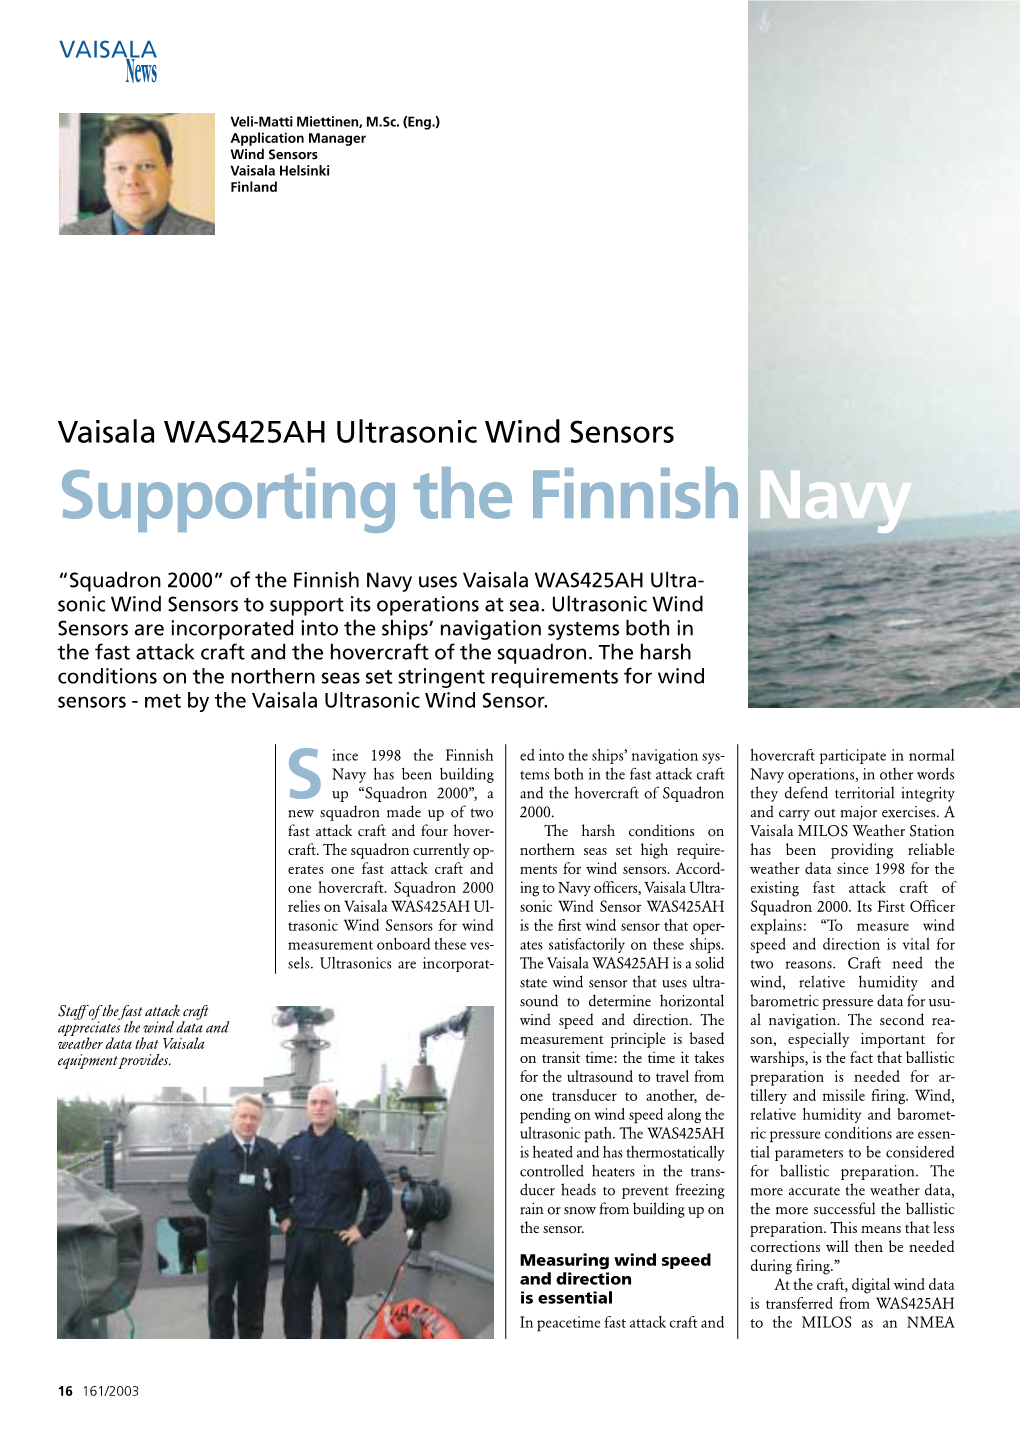 Supporting the Finnish Navy